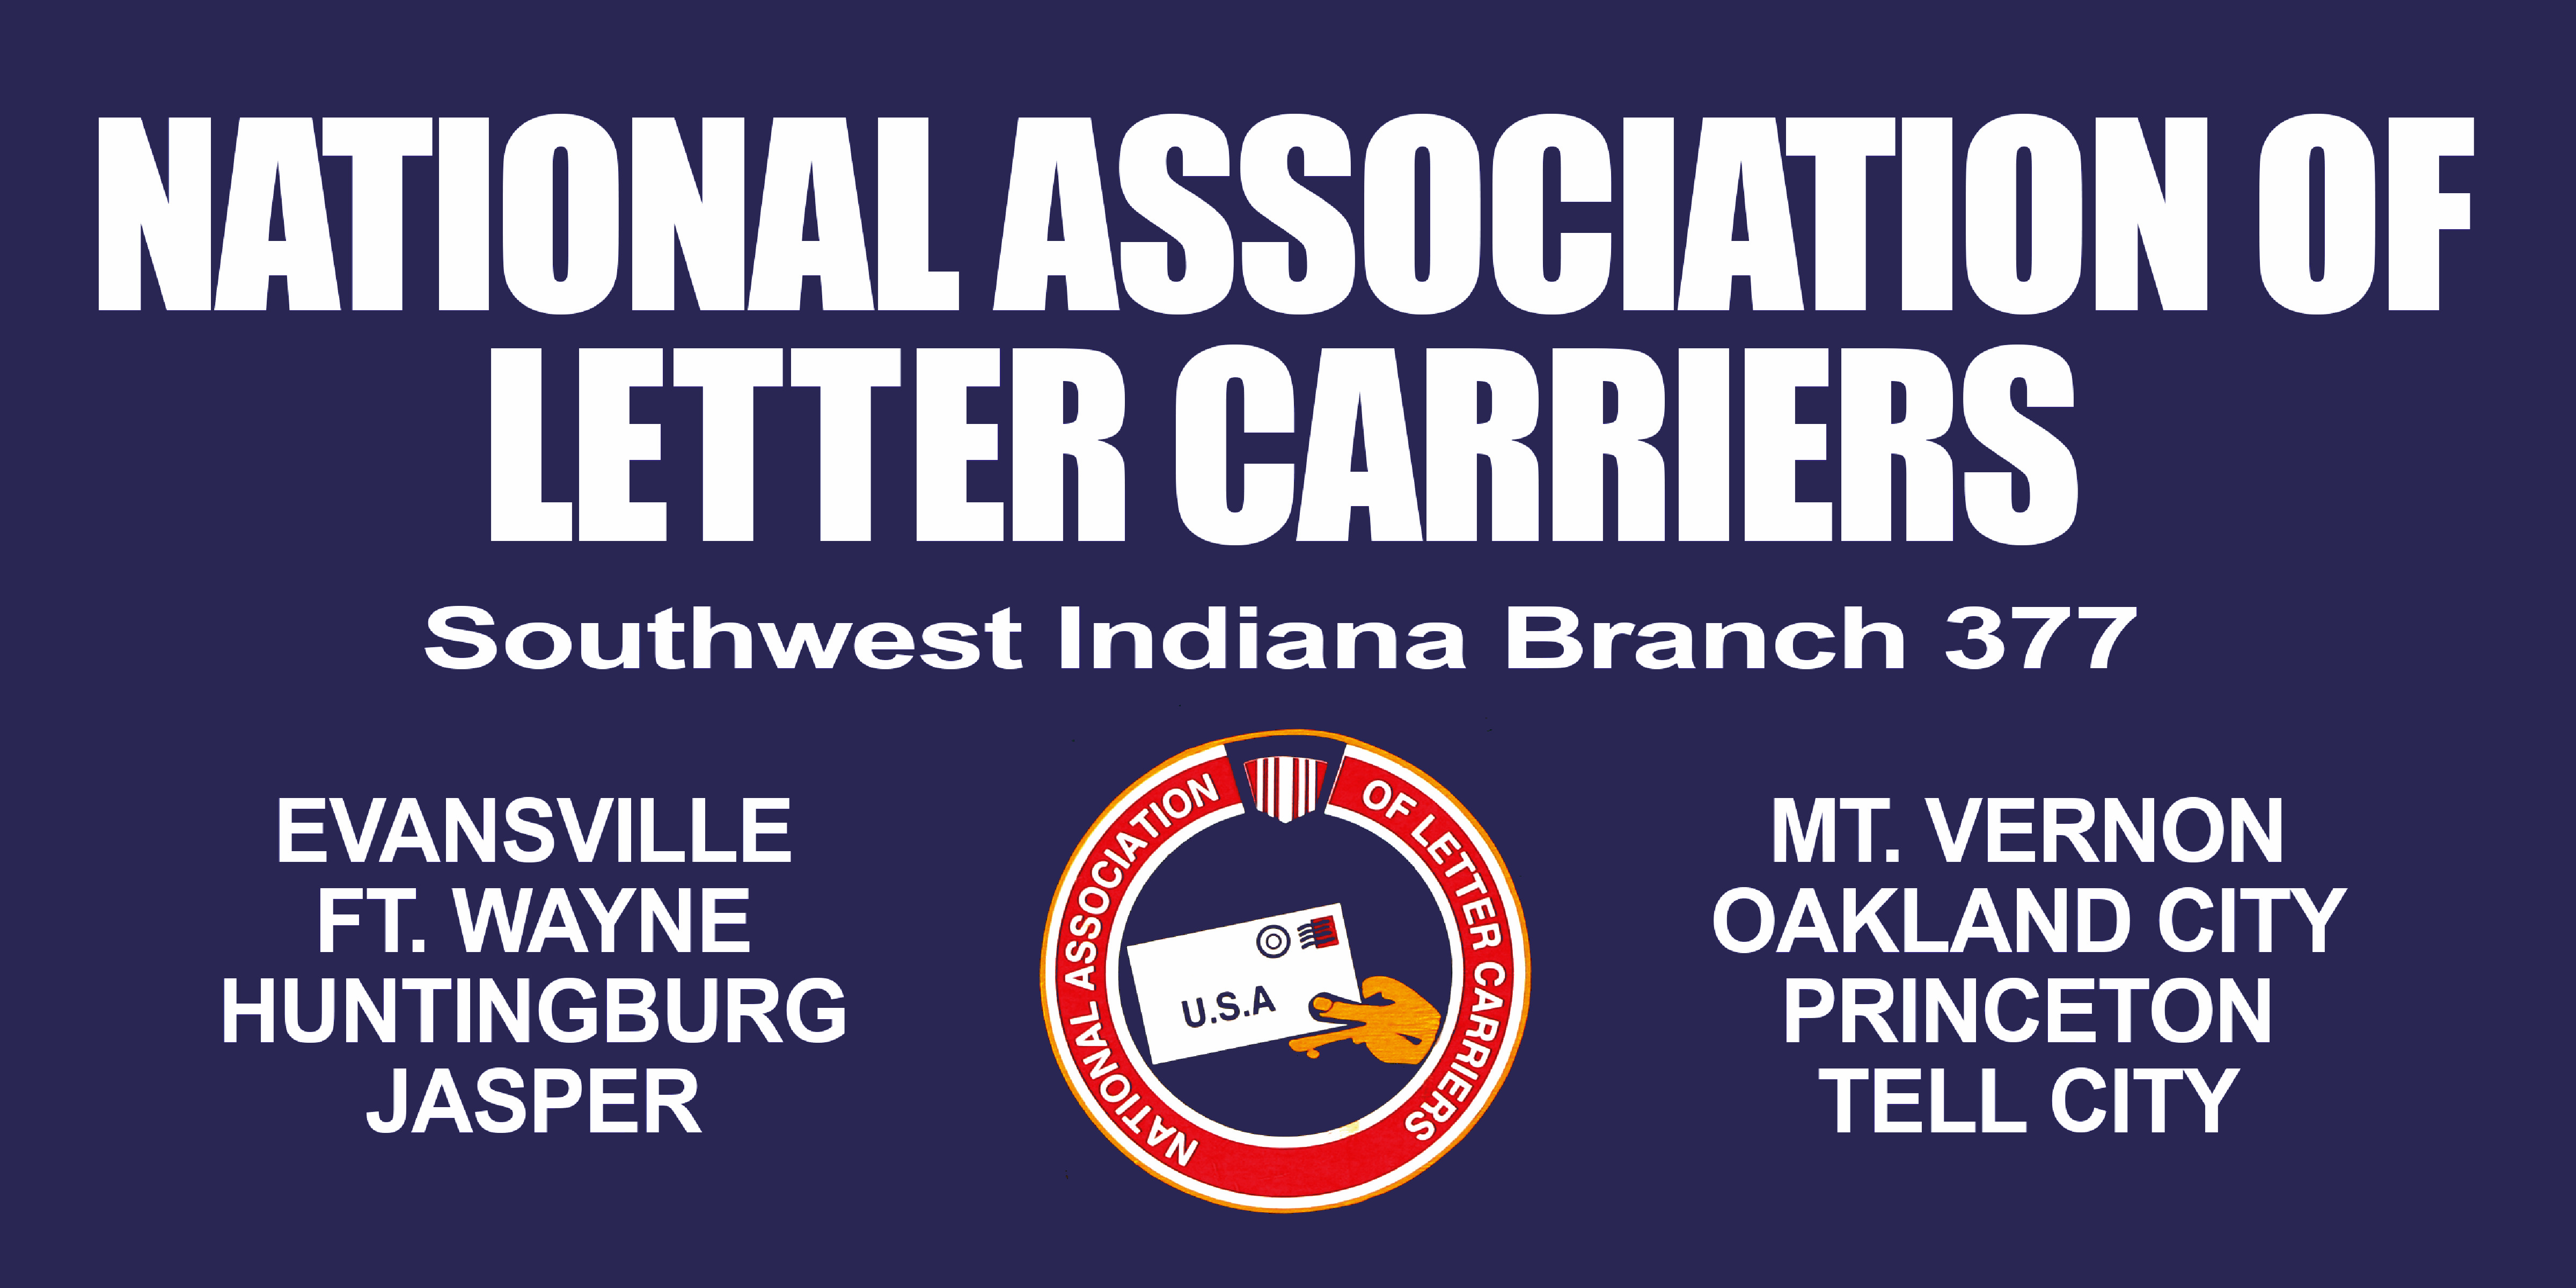 National-Association-Letter-Carriers-377